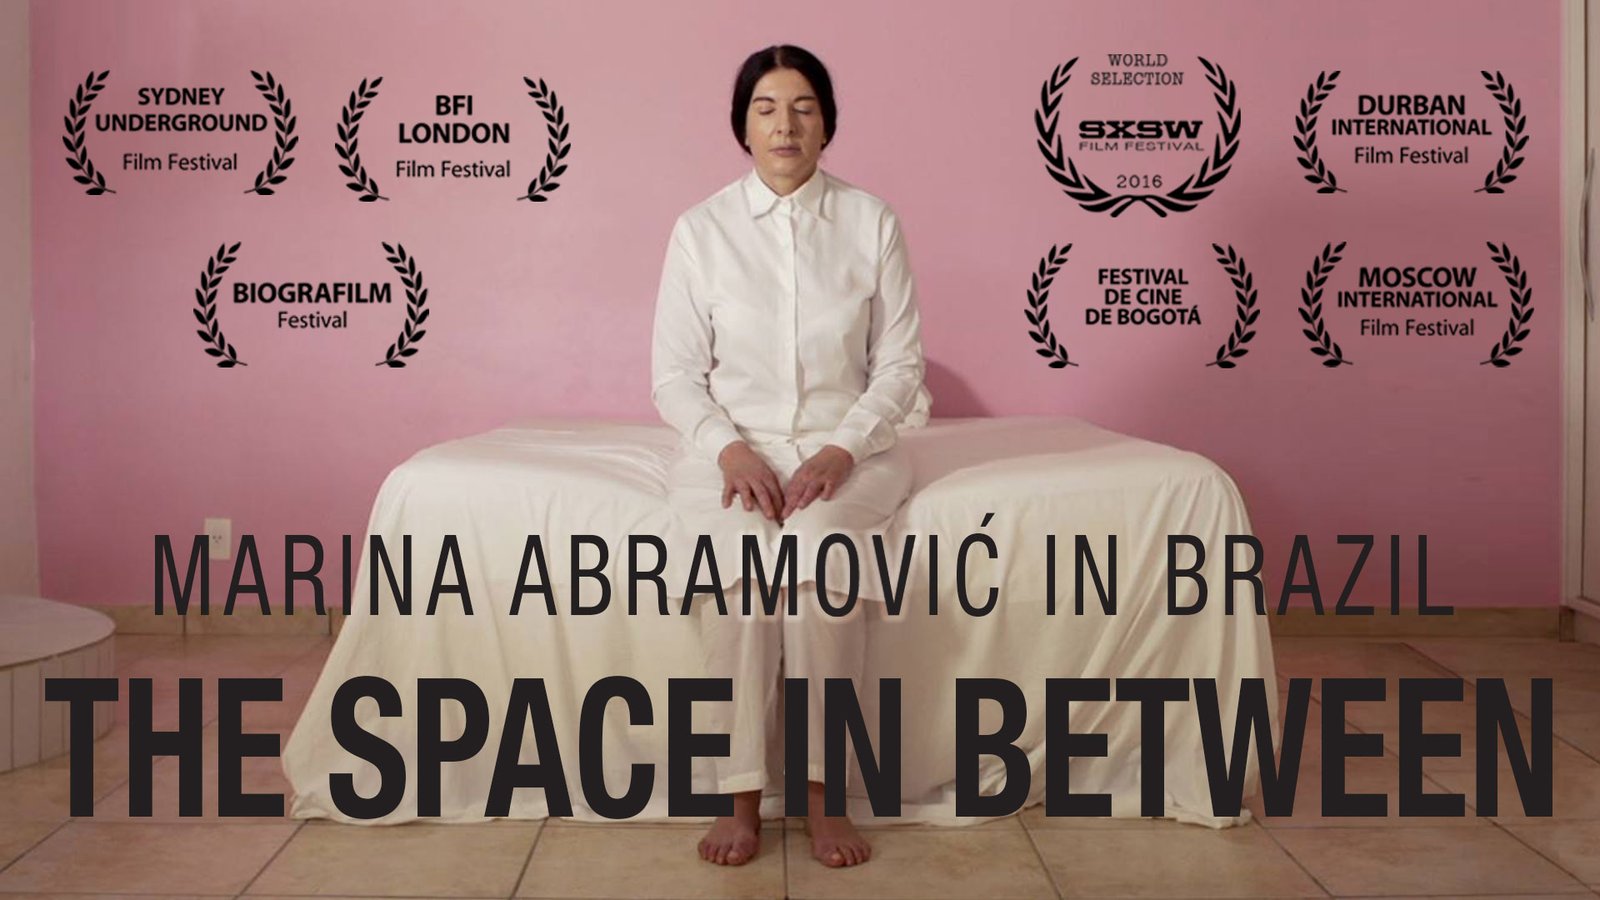 Marina Abramovic in Brazil: The Space in Between